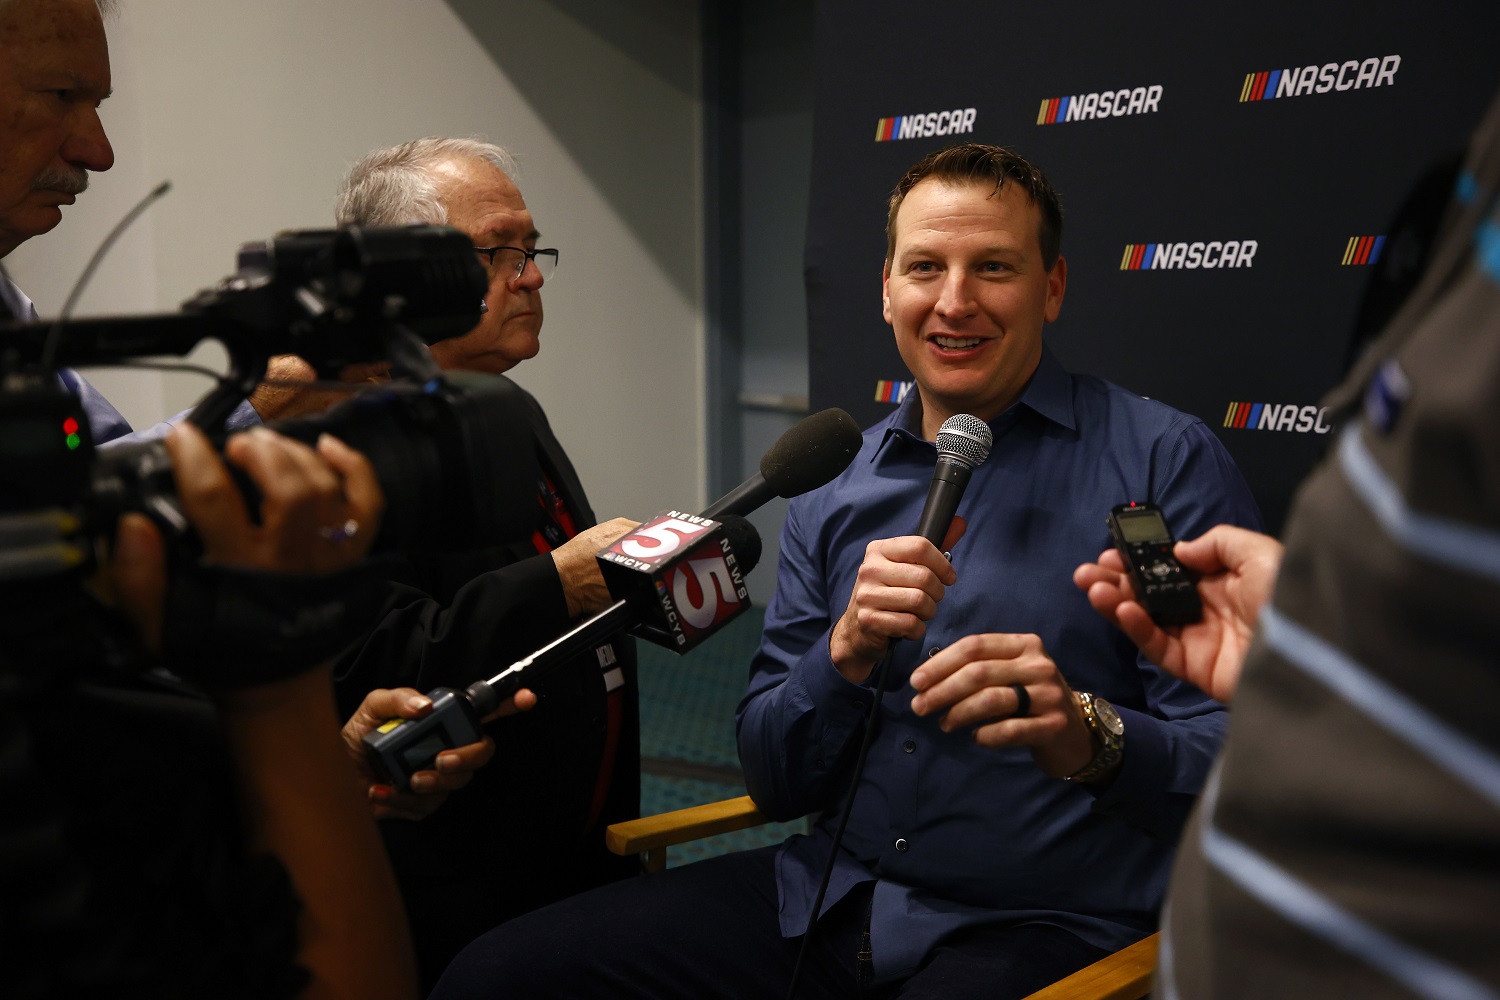 NASCAR Cup Series driver Michael McDowell speaks with the media prior to the NASCAR Champion's Banquet at Music City Center on Dec. 2, 2021 in Nashville, Tennessee. | Jared C. Tilton/Getty Images